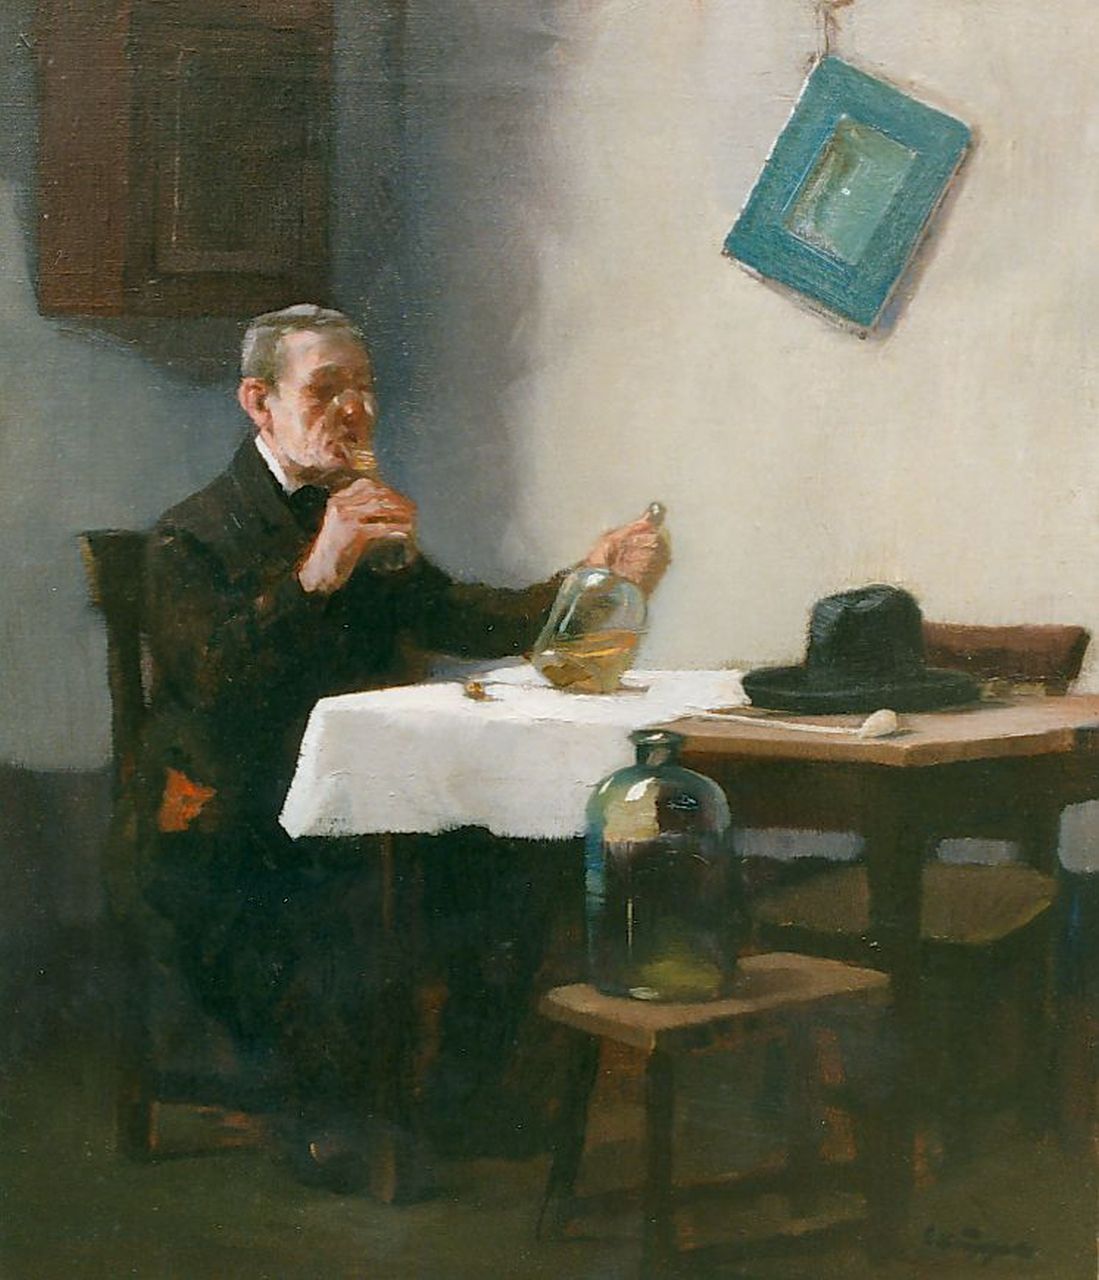 Küppers L.  | Leo Küppers, The wine-taster, oil on canvas 54.5 x 46.2 cm, signed l.r.